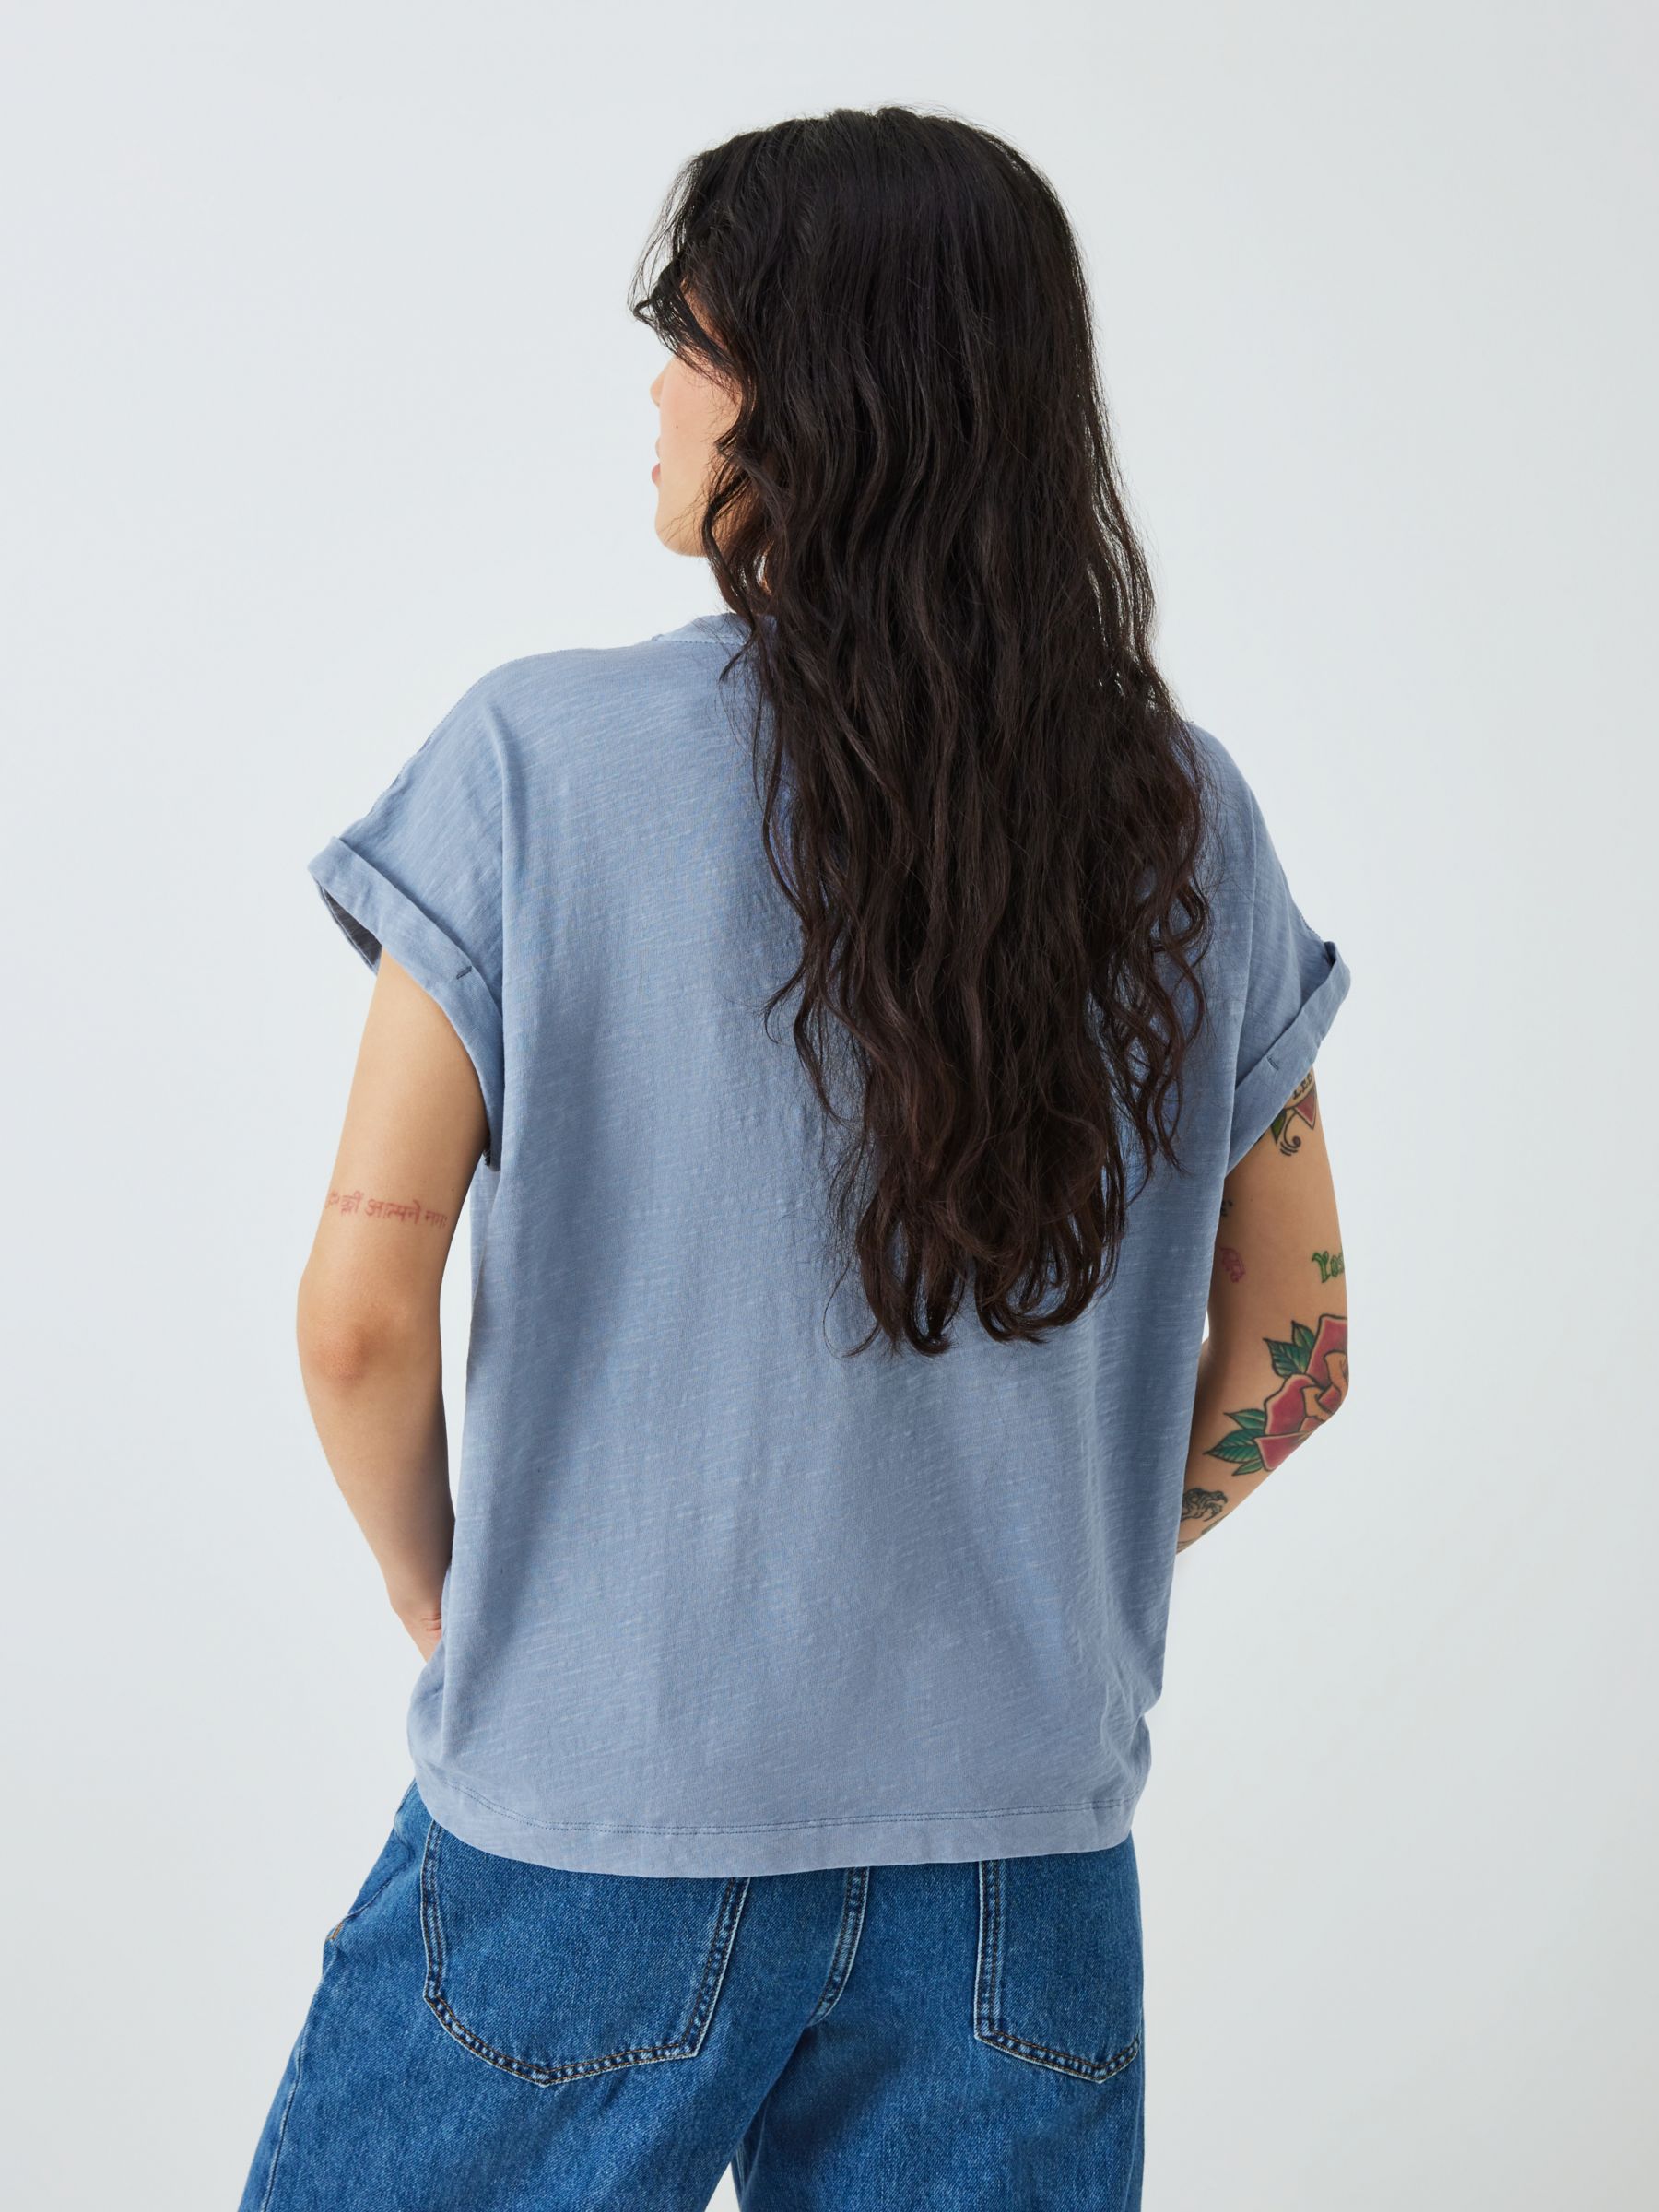 AND/OR Garment Dyed Stitch Tank T-Shirt, Soft Blue, 6